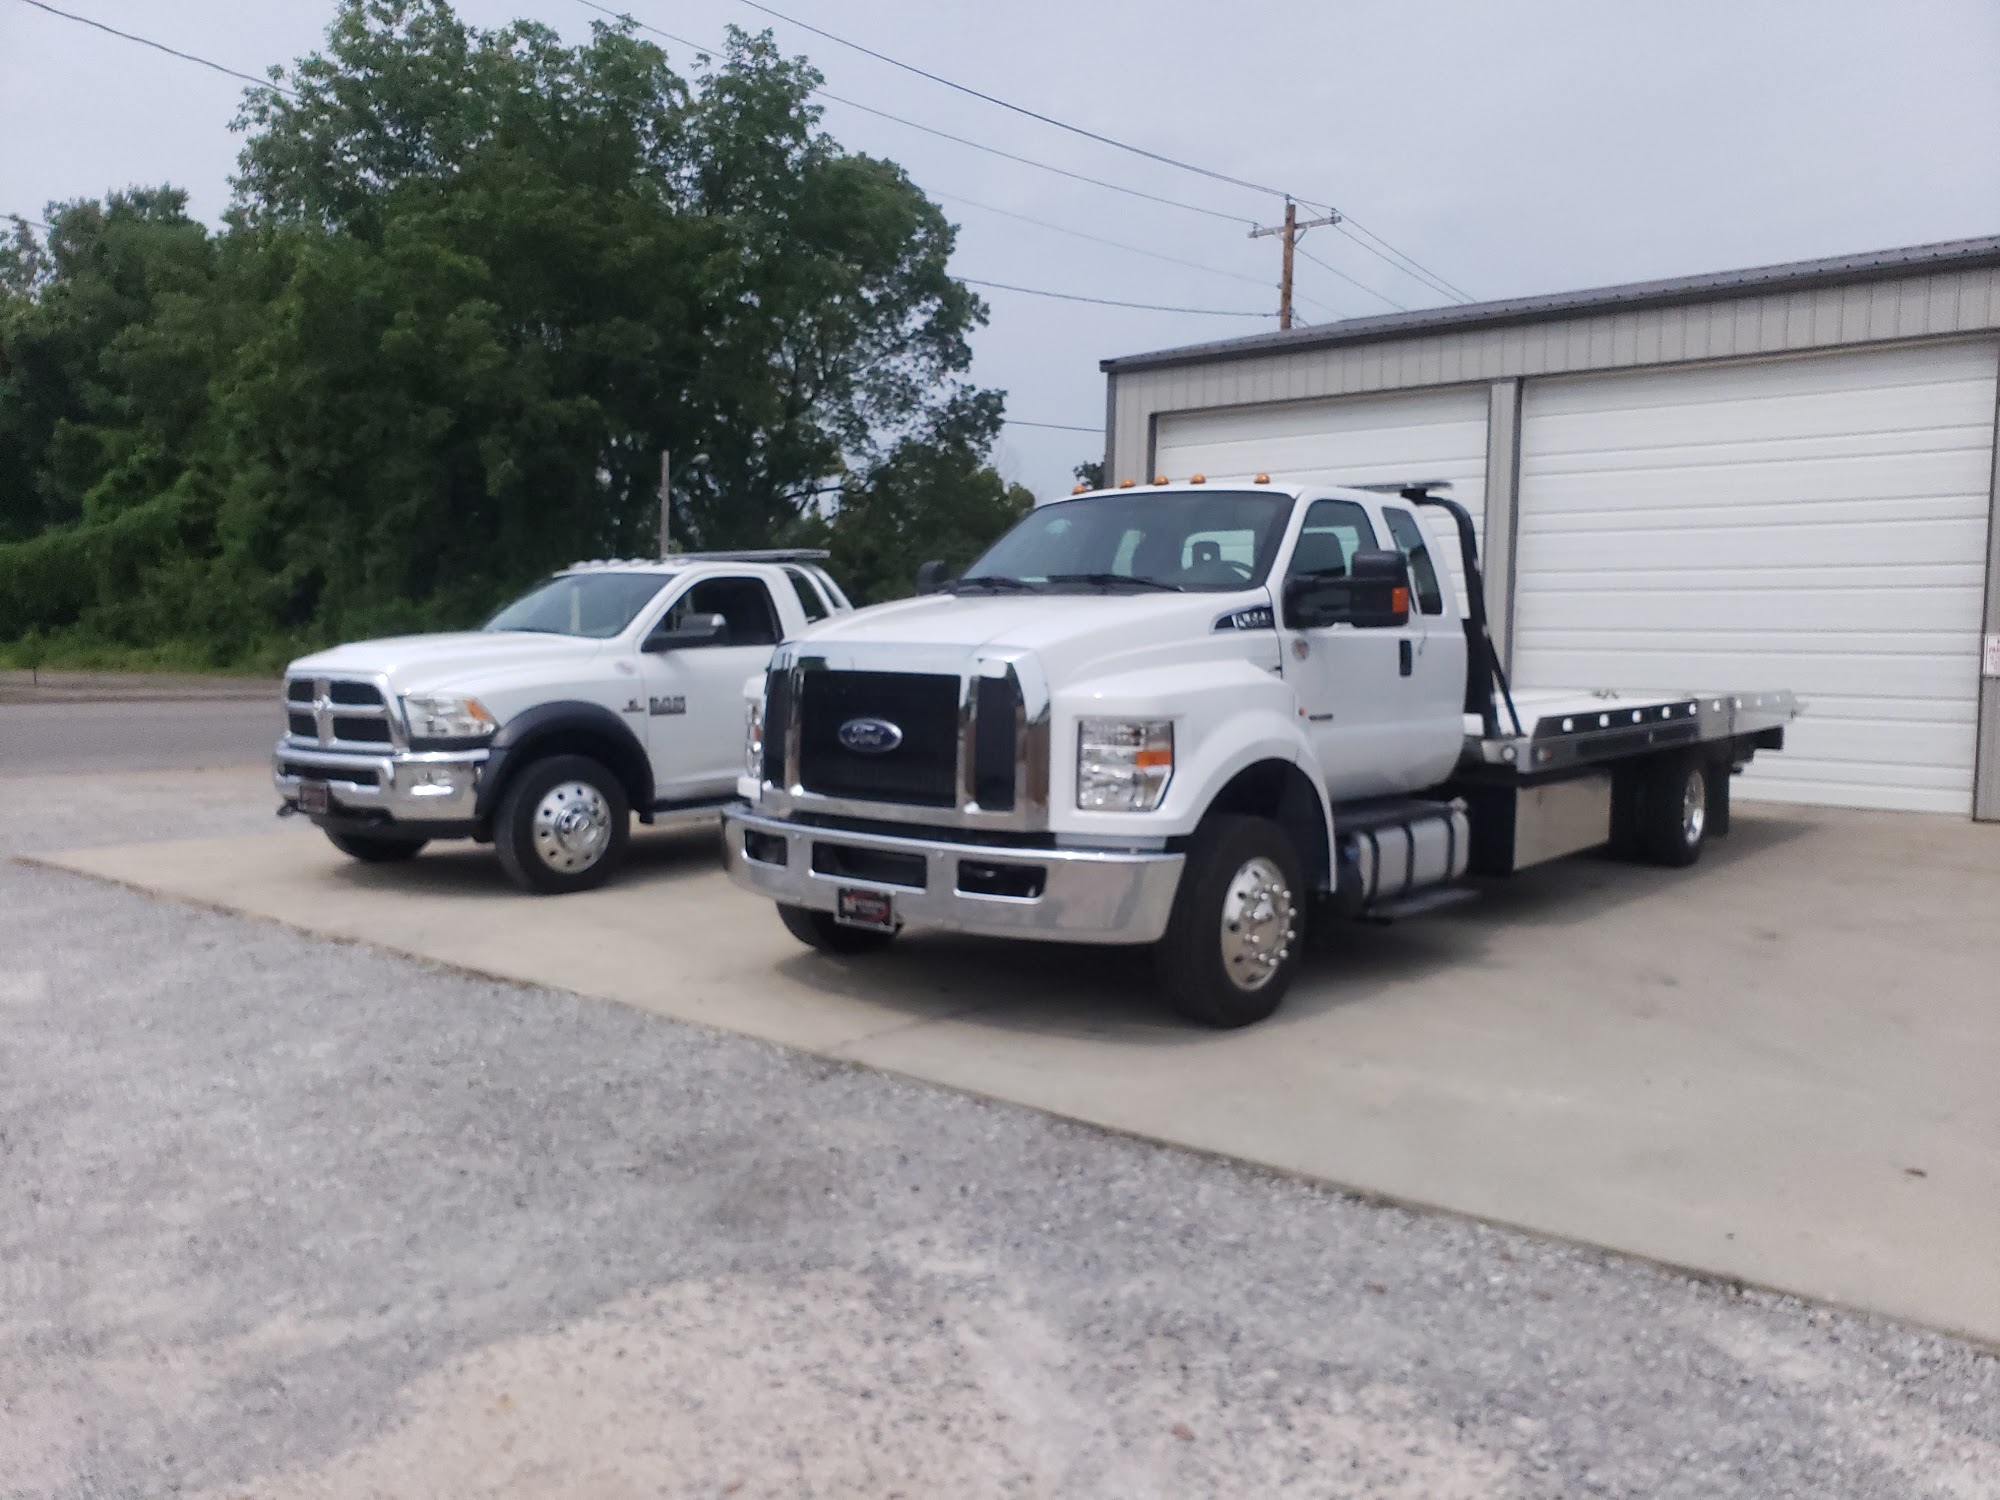 C&W Towing and Recovery